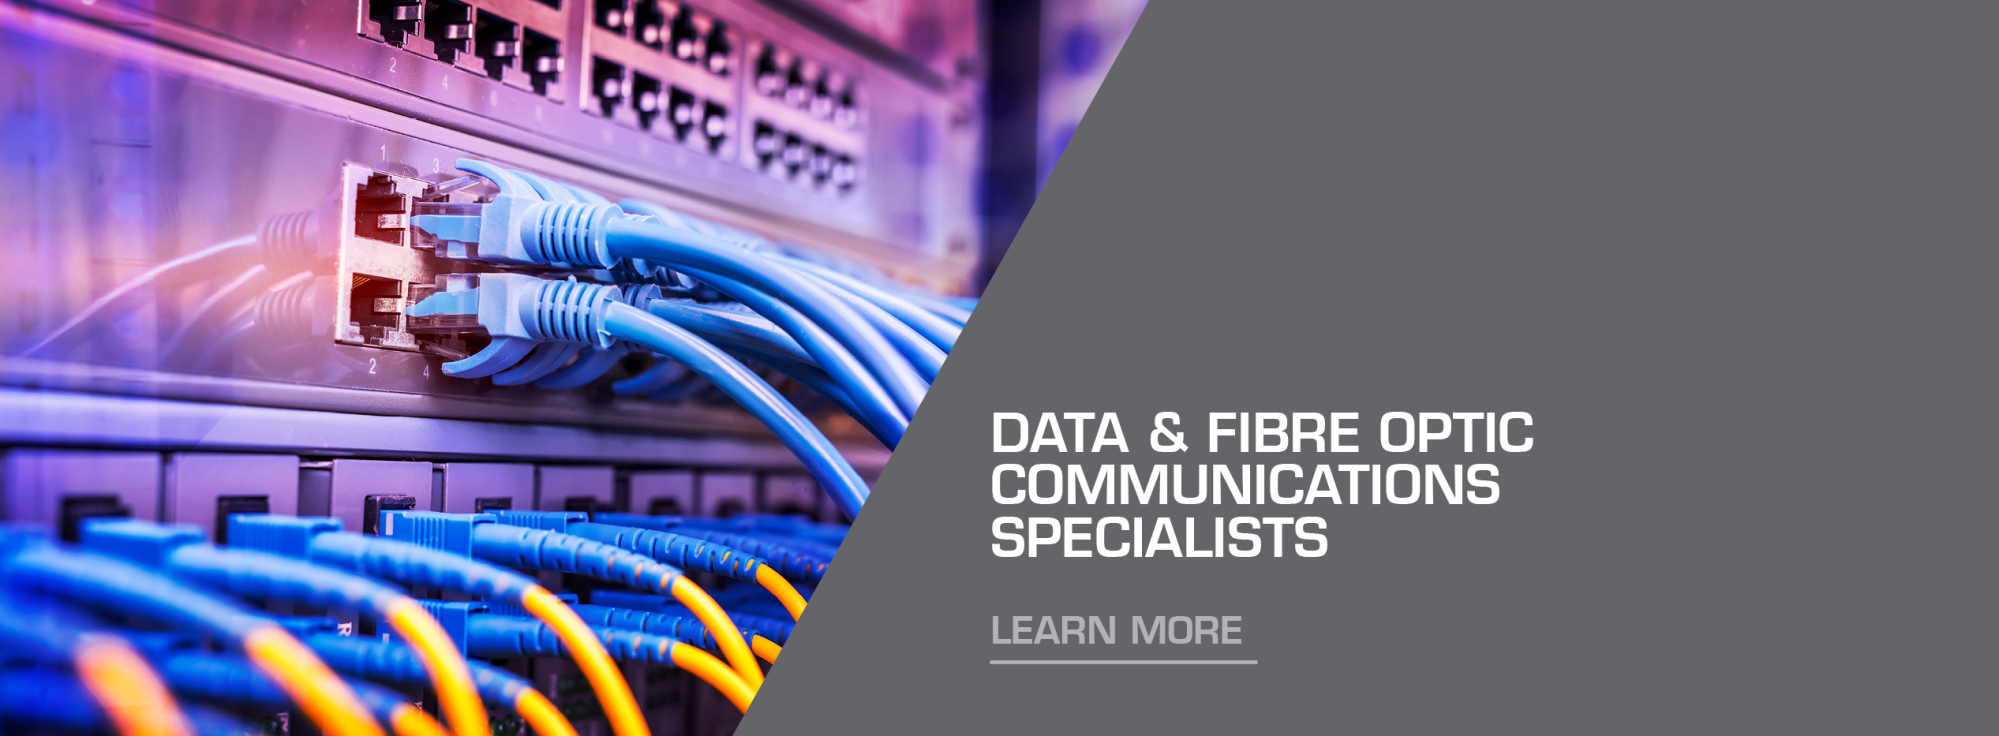 Walltech are data and fibre Optic communications specialists. Learn more about our services.